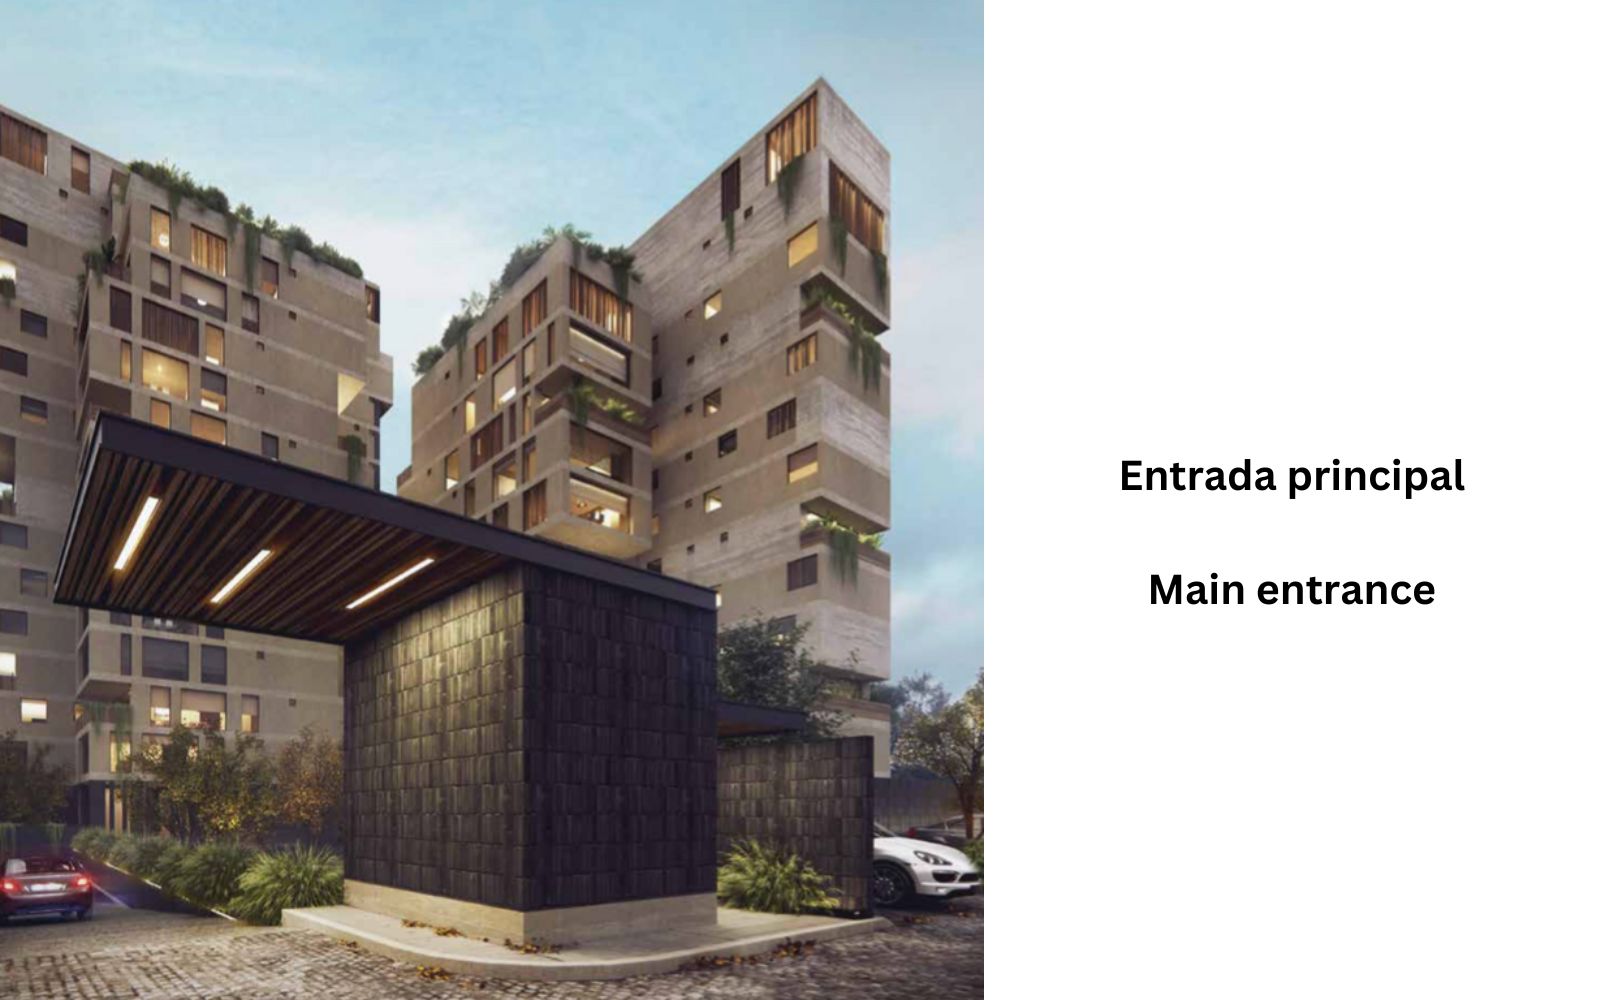 Condominium with volleyball court, basketball court, pool, gym, pre-construction, for sale, Querétaro.